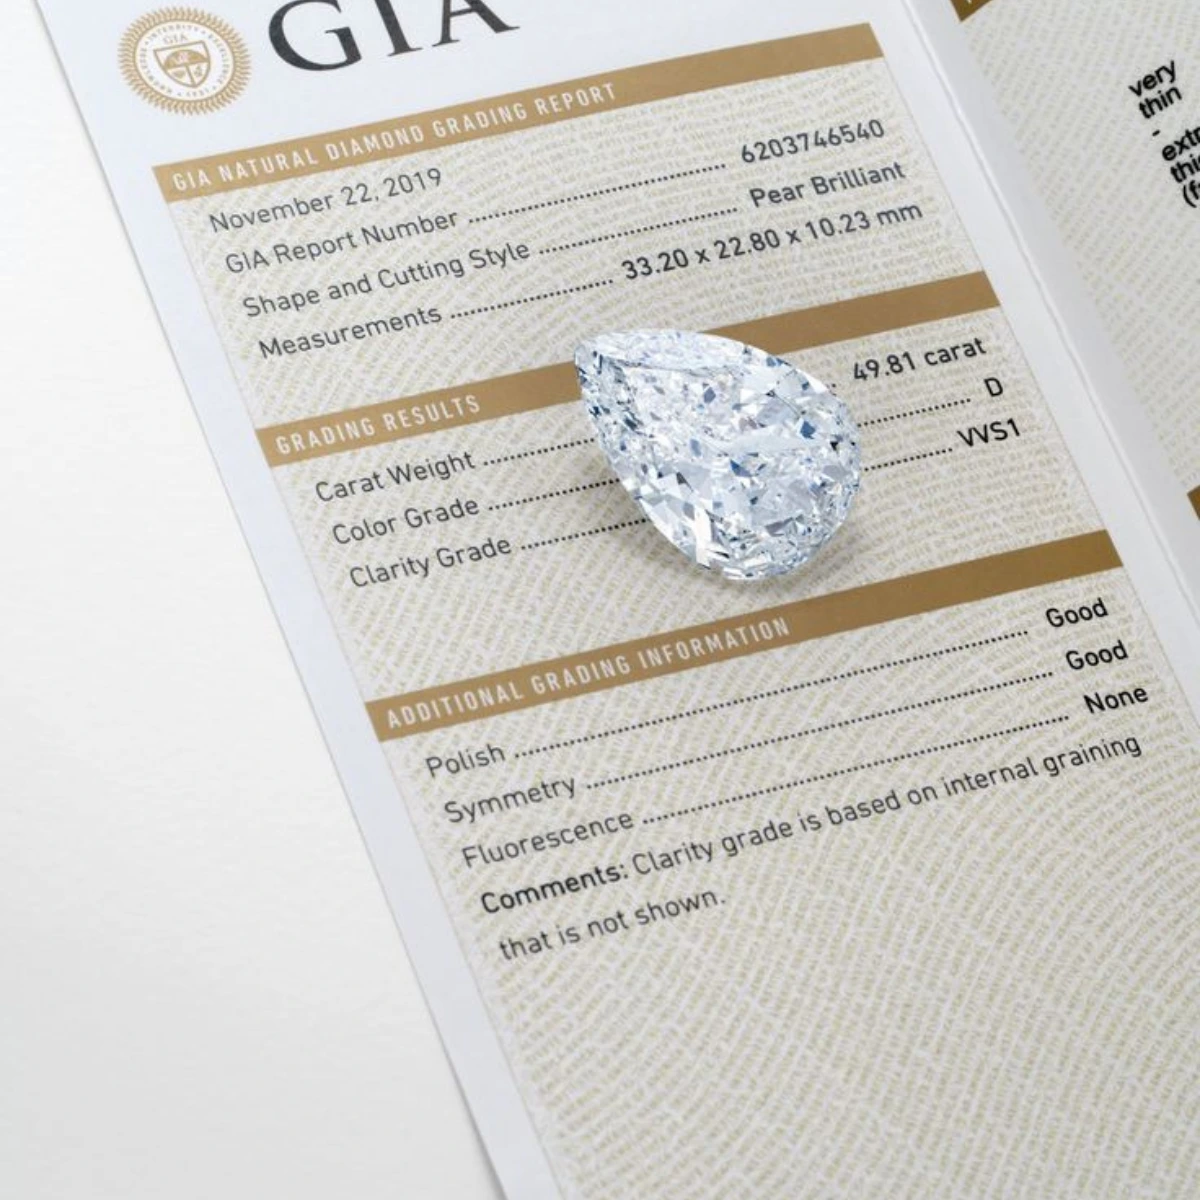 what is GIA ?